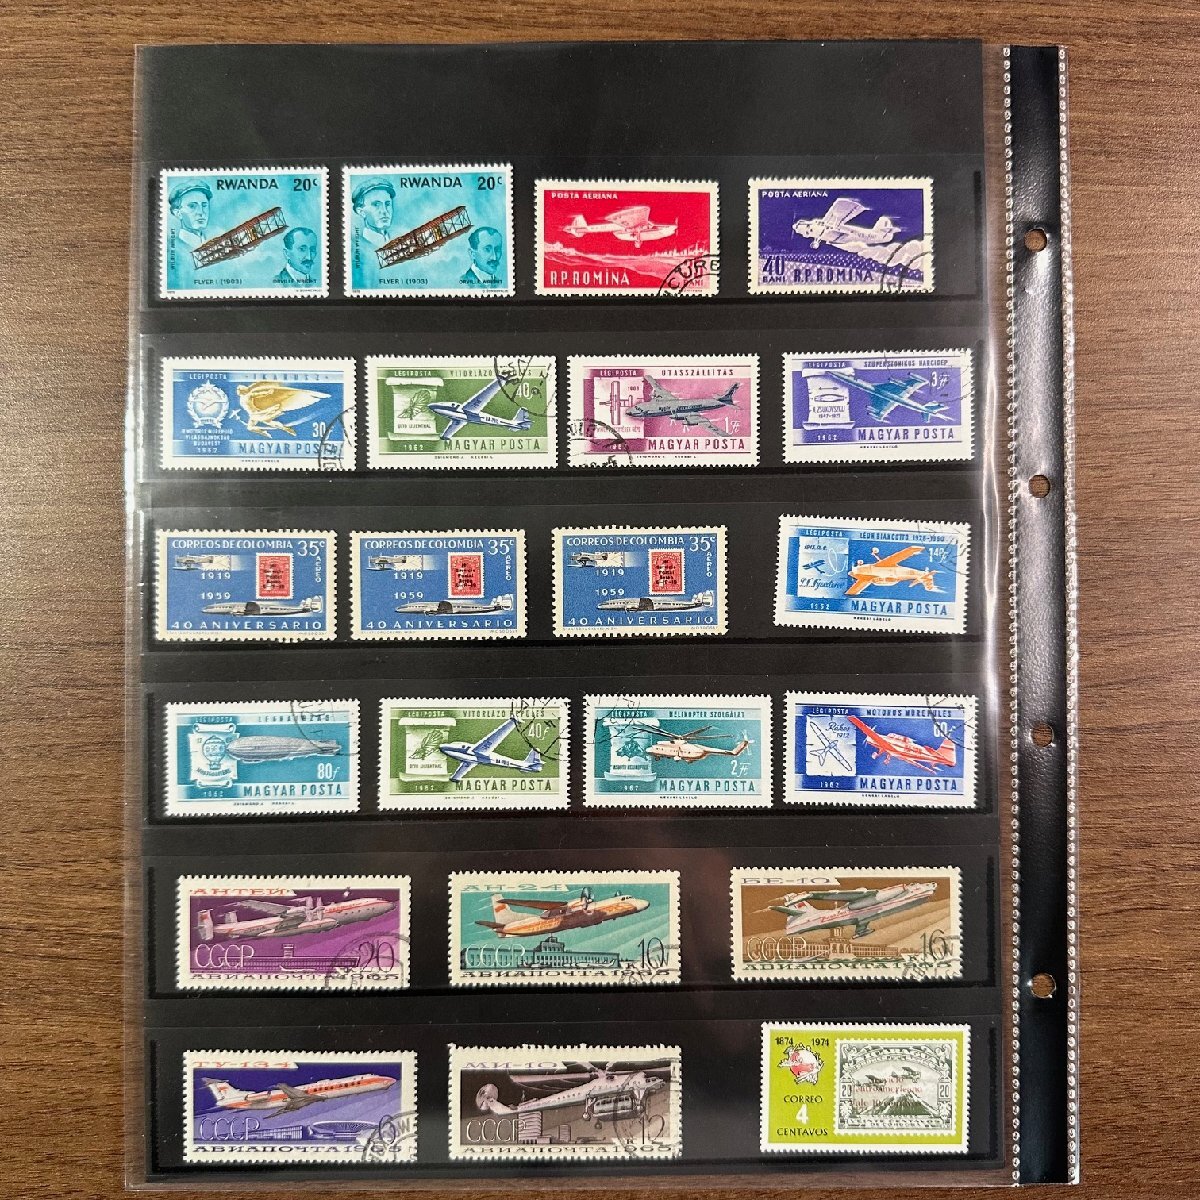 ** foreign stamp ** rare foreign stamp . summarize airplane series treasure searching collection house discharge goods 99